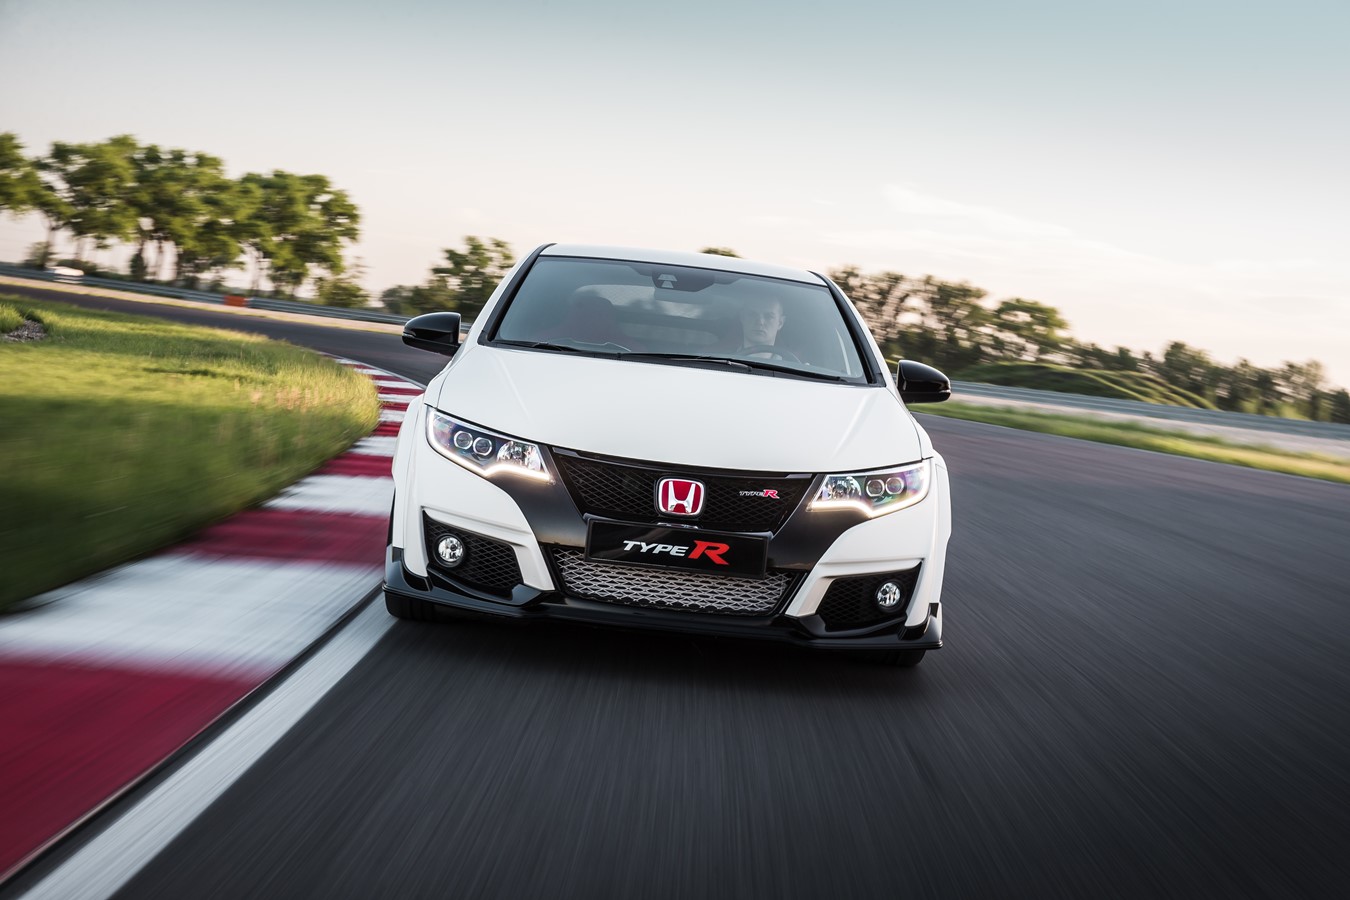 Civic Type R races into the final five of World Performance Car of the Year 2016